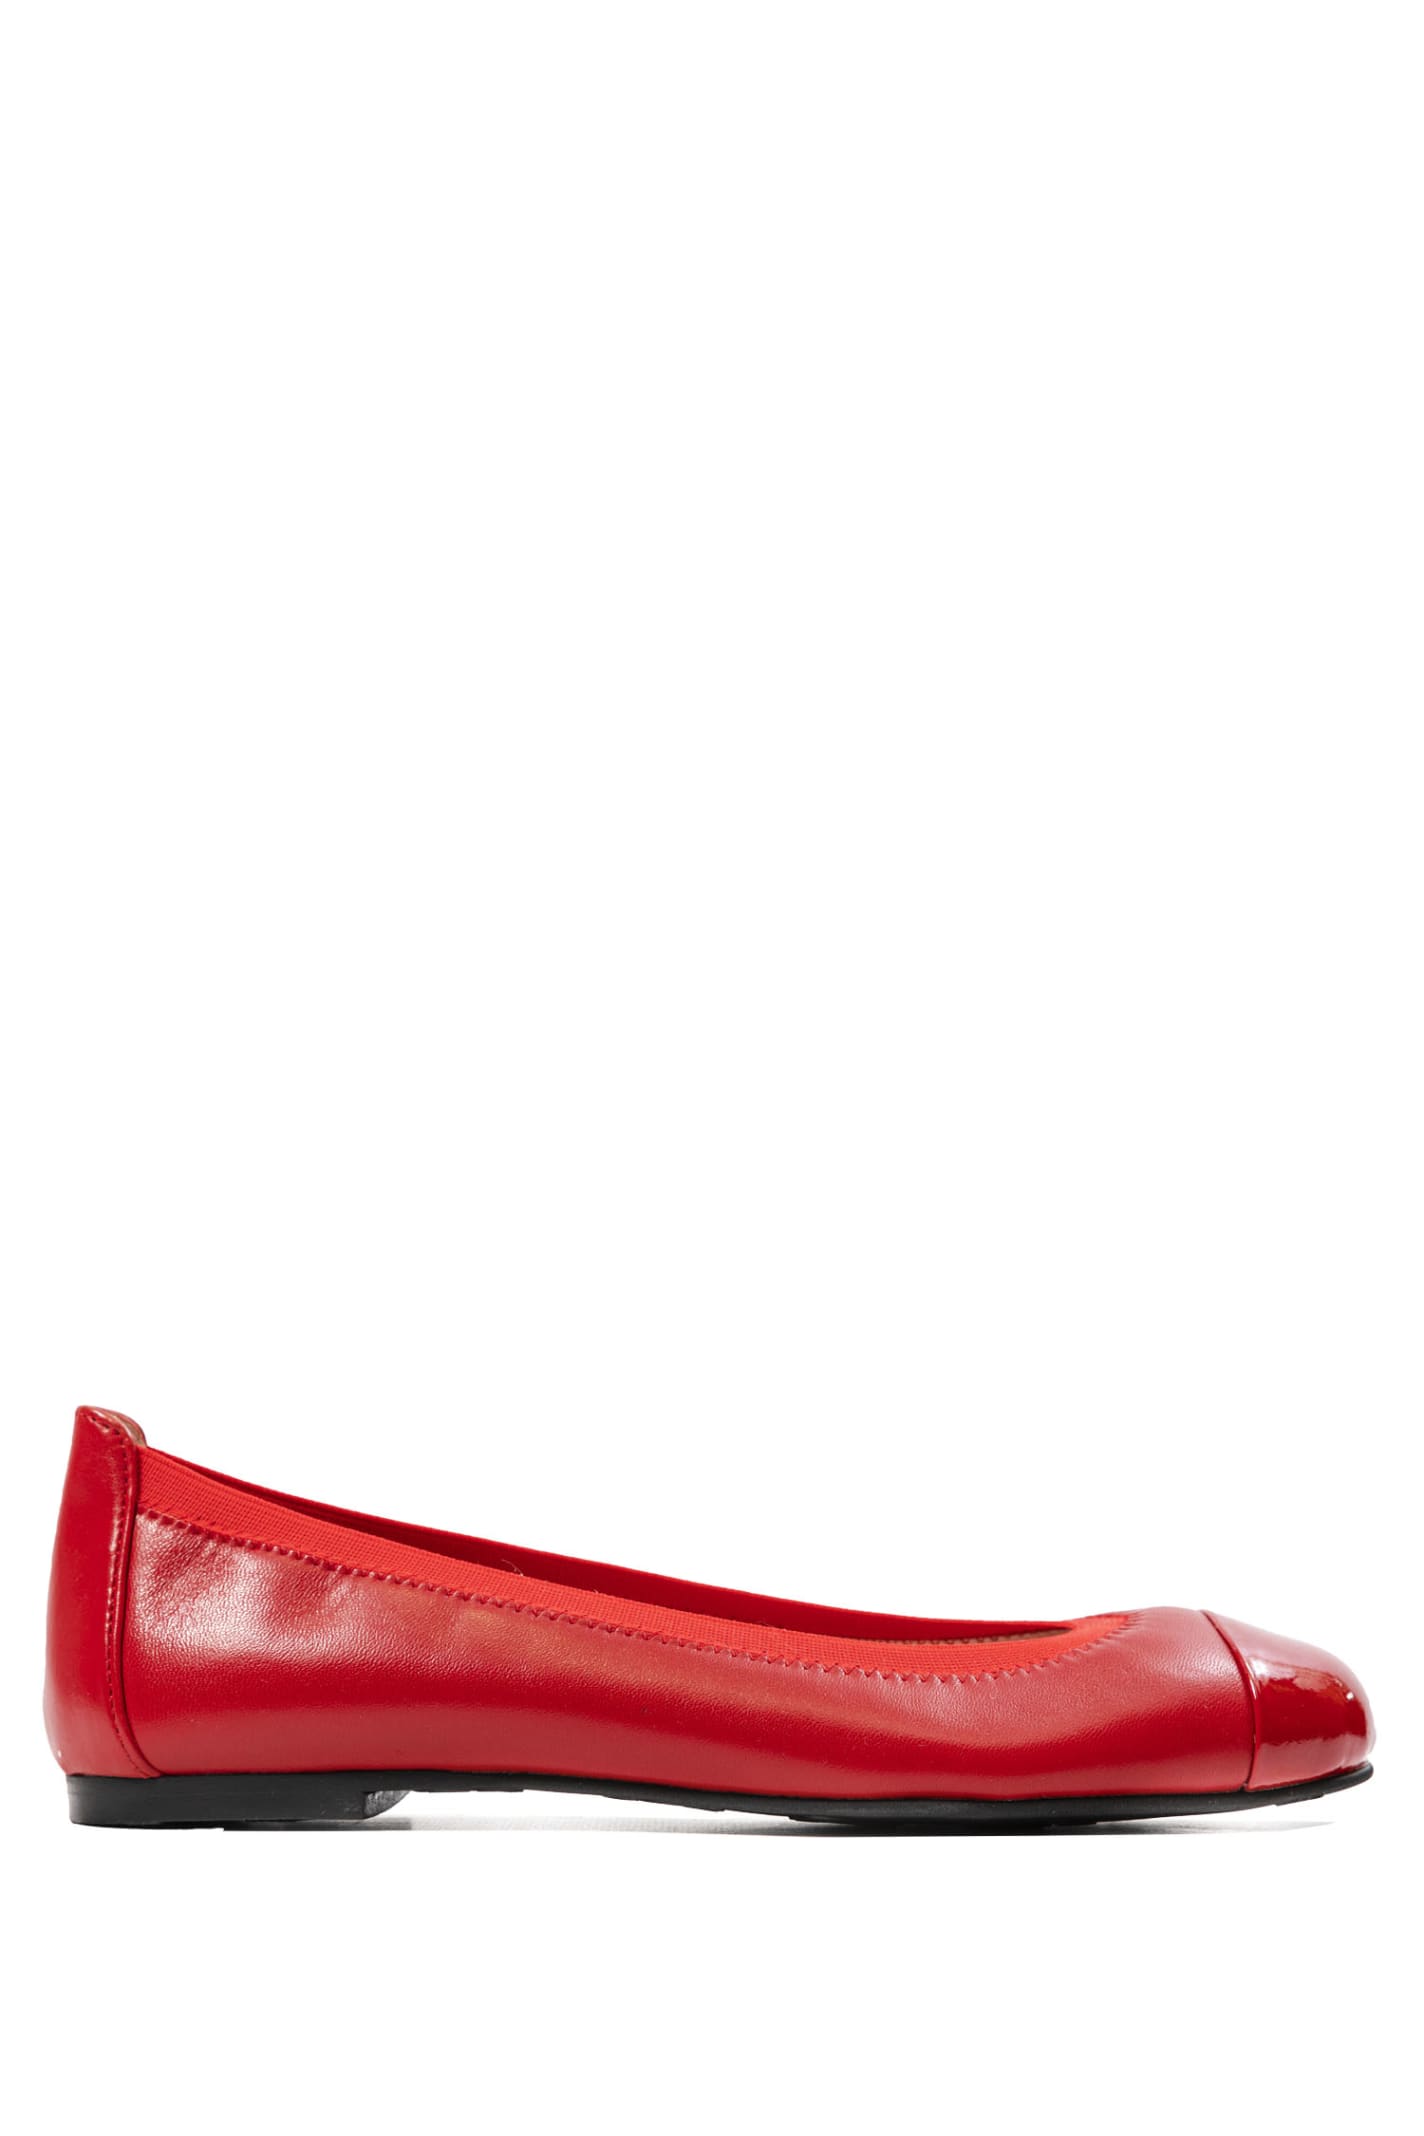 Pretty Ballerinas Kids' Leather Ballet Flats In Red